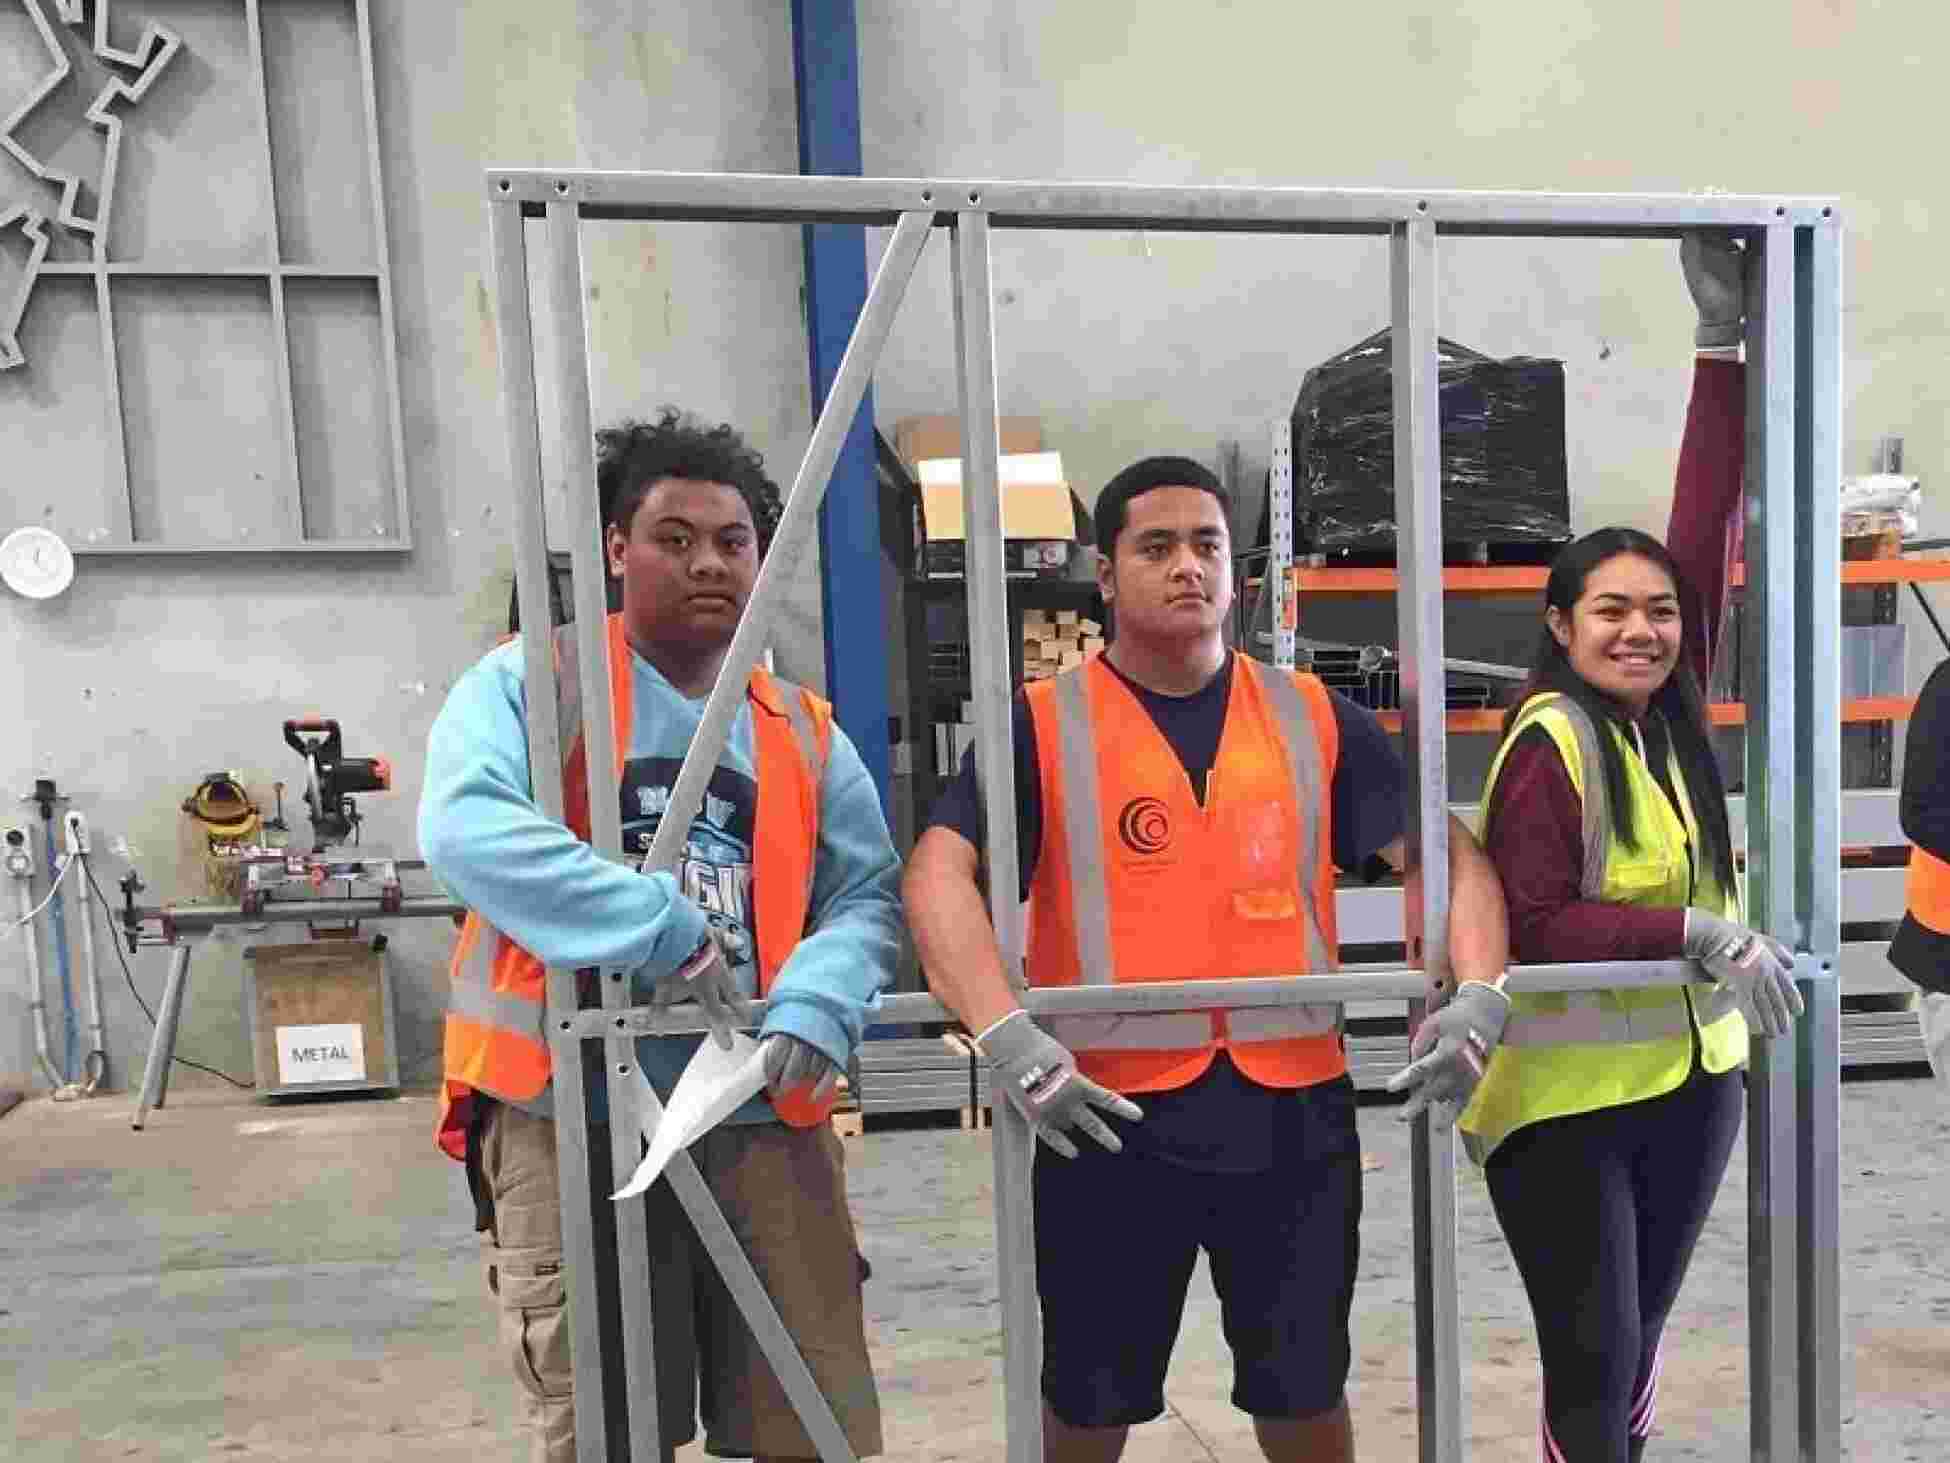 Oceania Career Academy level 3 building course student visit 10th May 2019